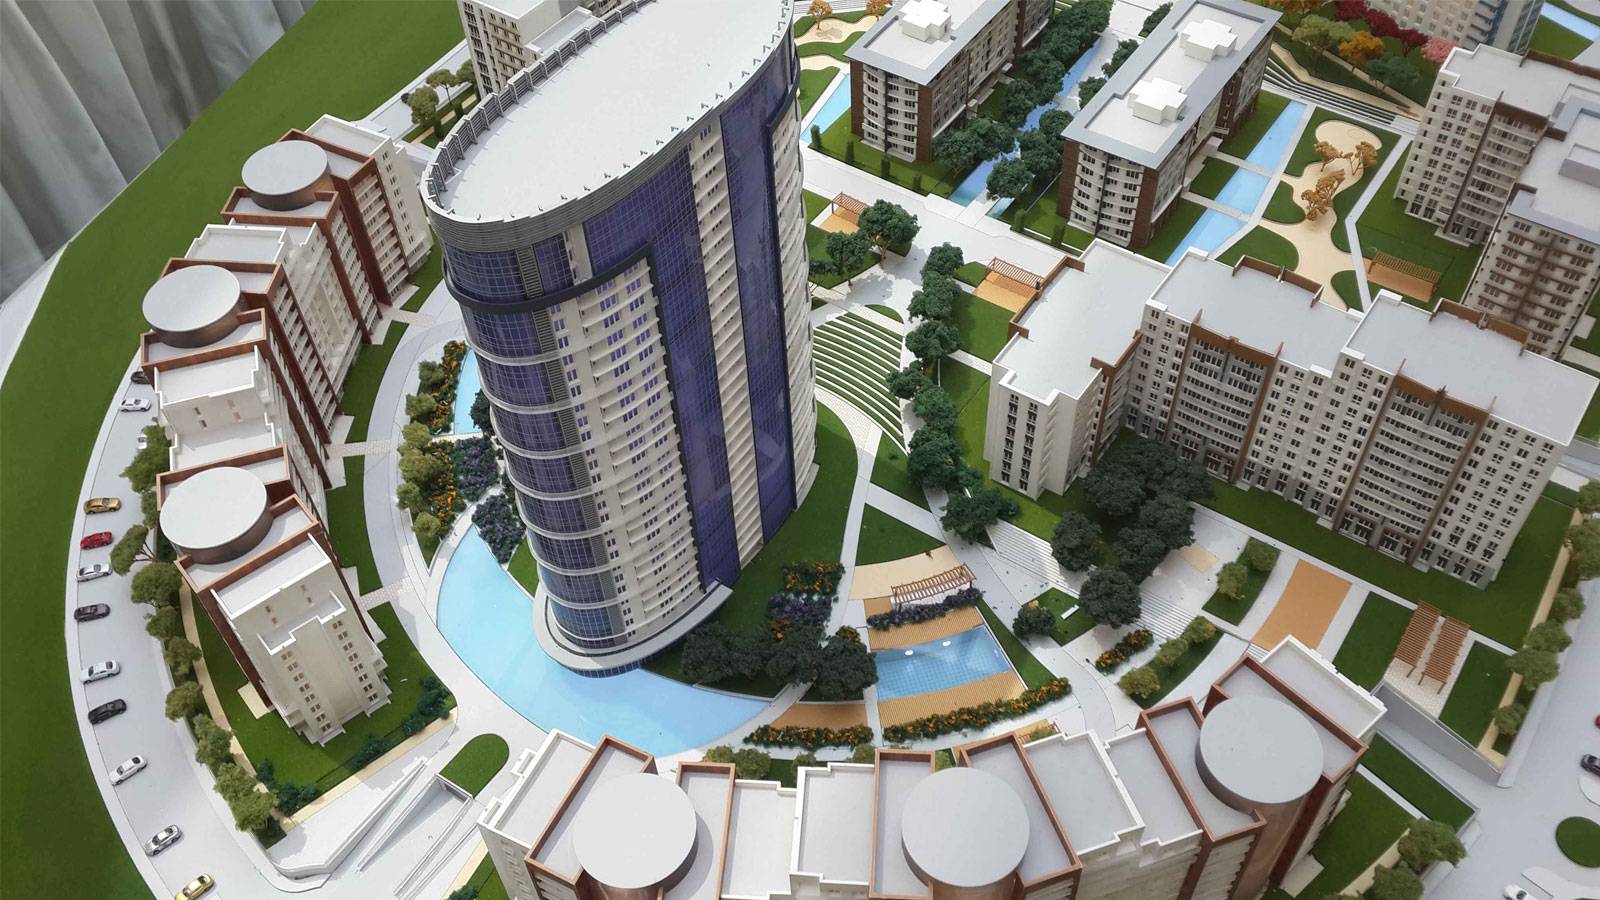 03.07.2013 Tema Park Residential Section has been unveiled.